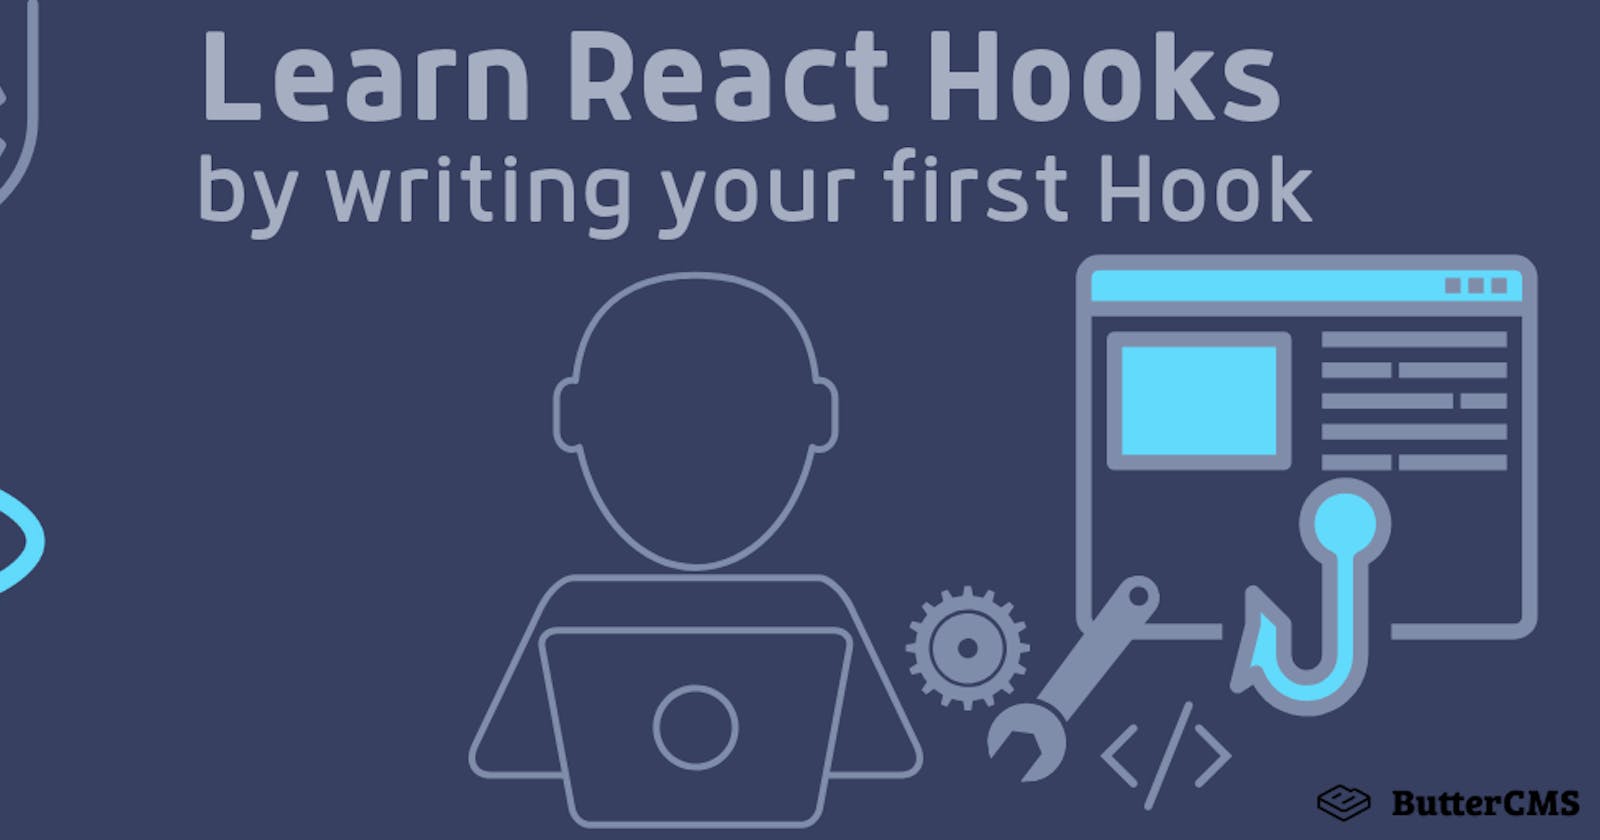 Learn React Hooks by writing your first Hook